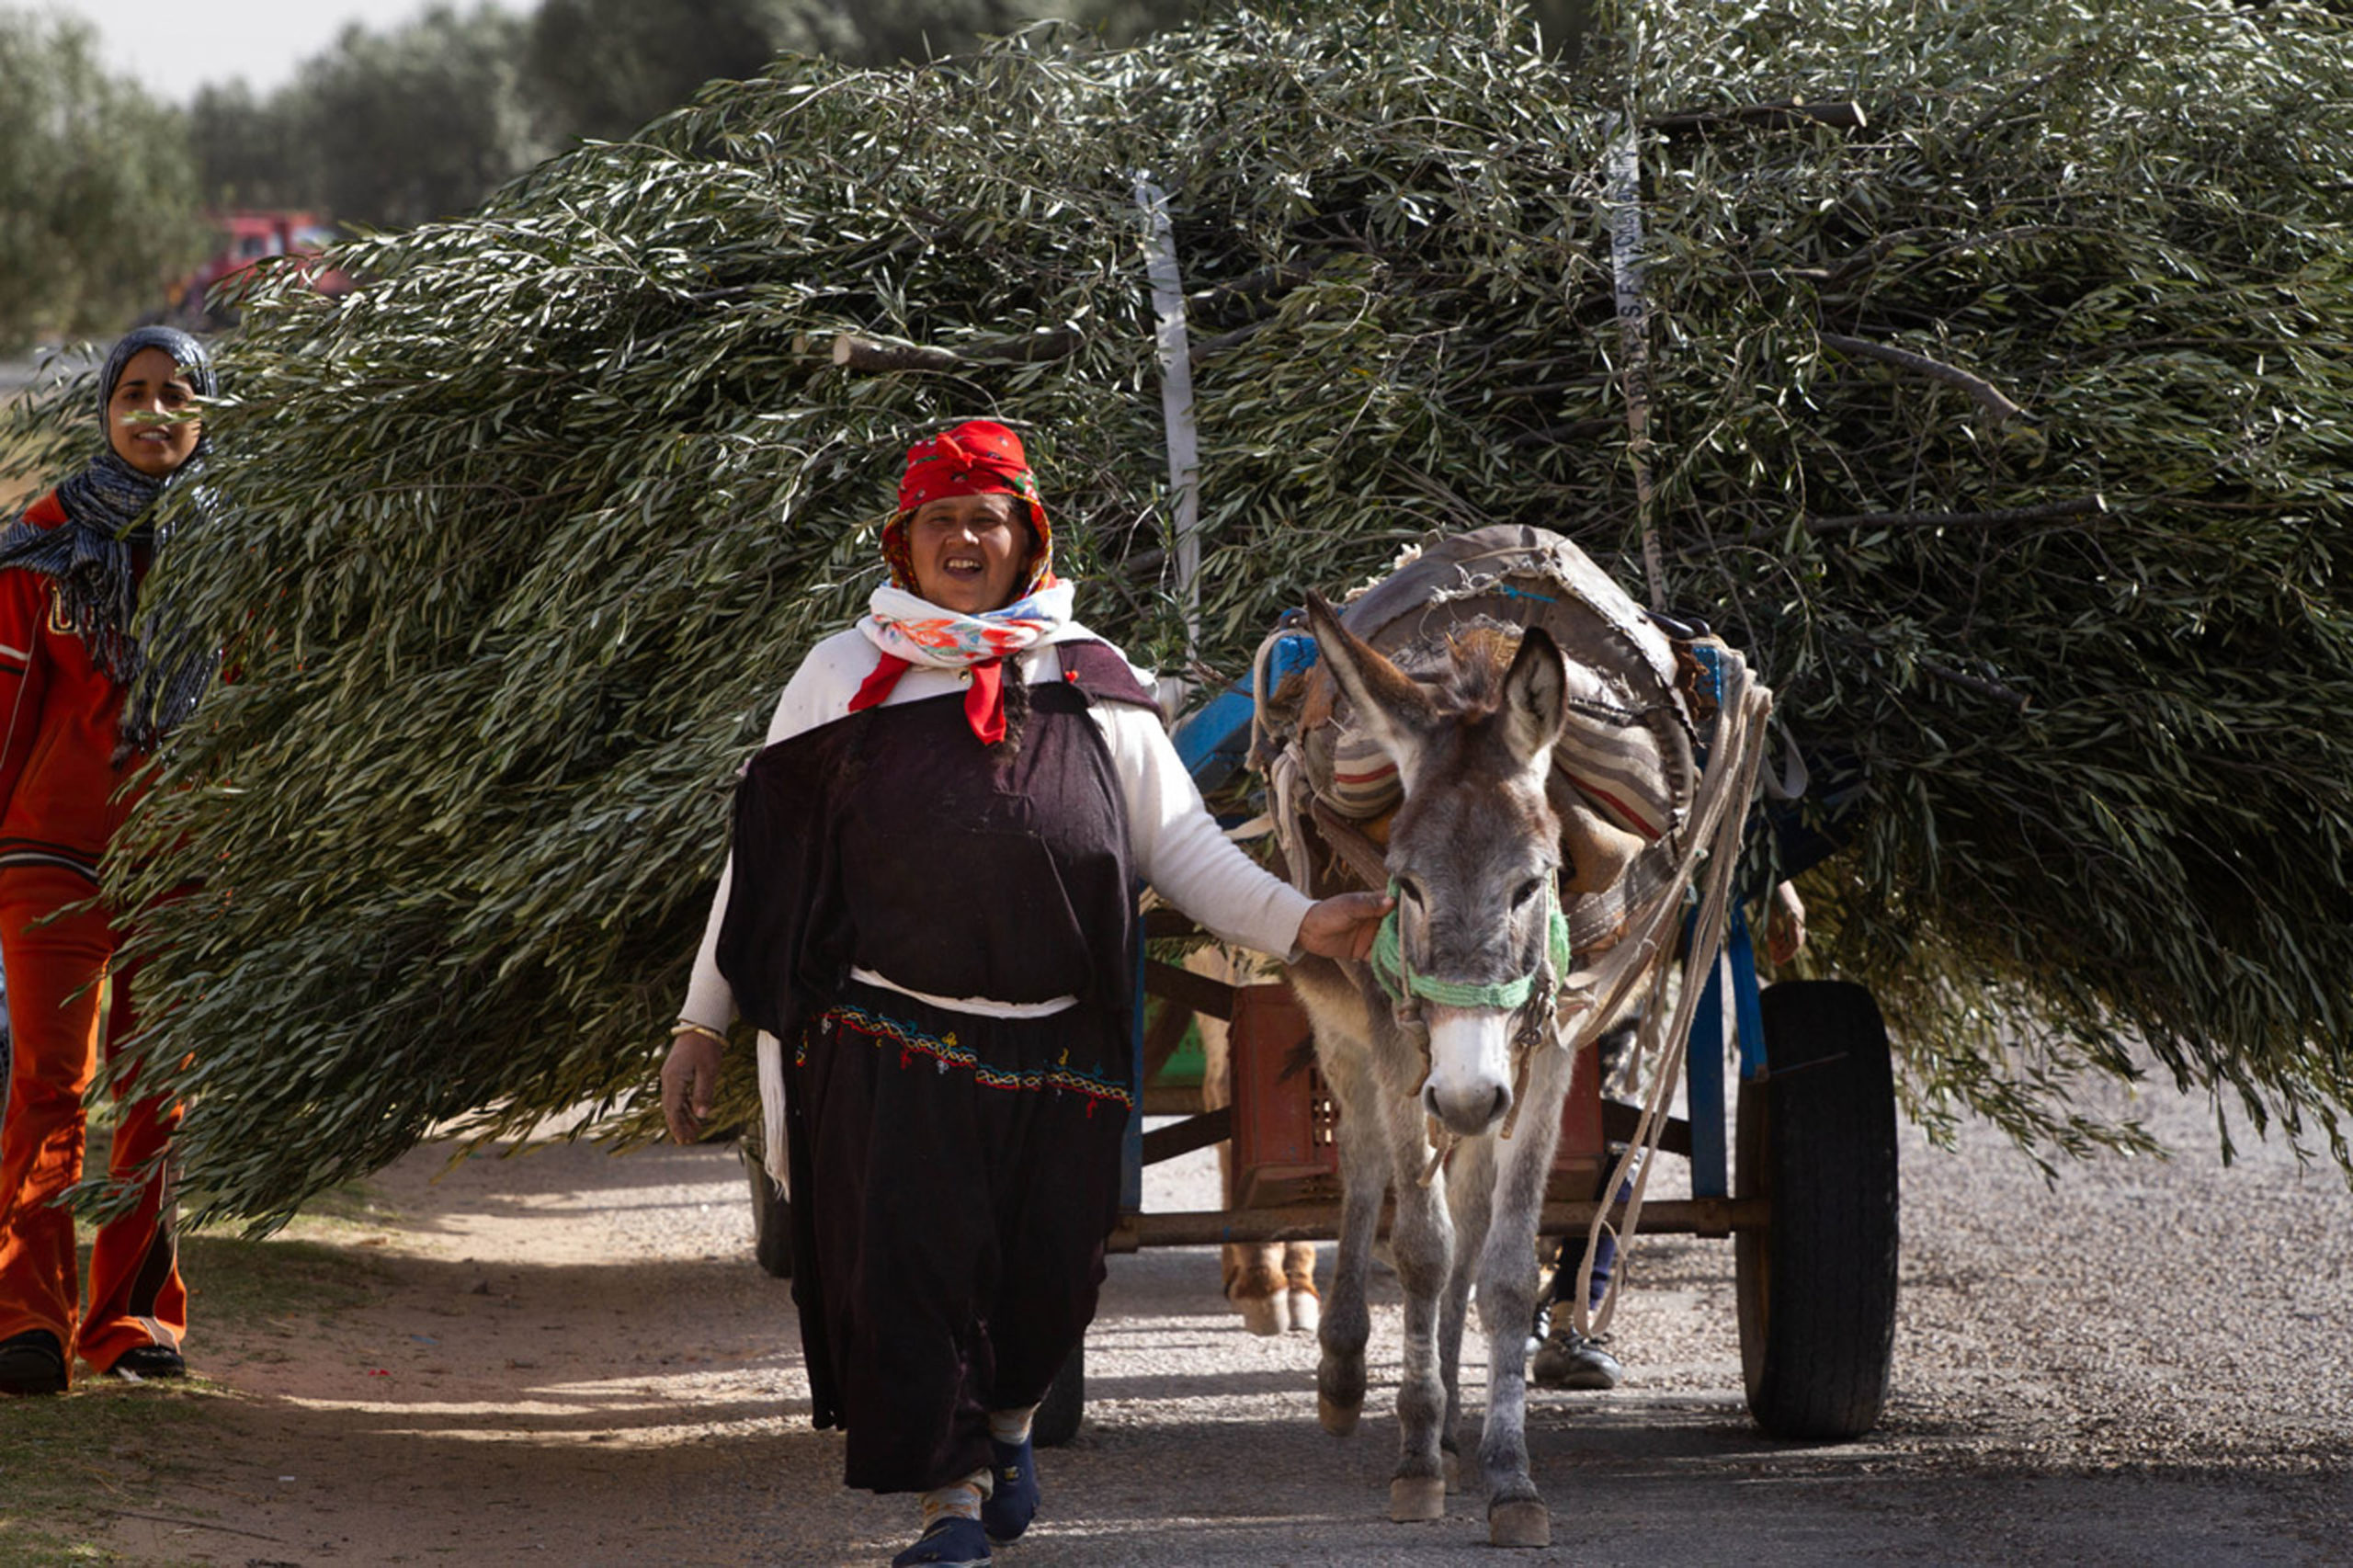 Tunisia Trip - A woman leads her donkey and produce along the road.